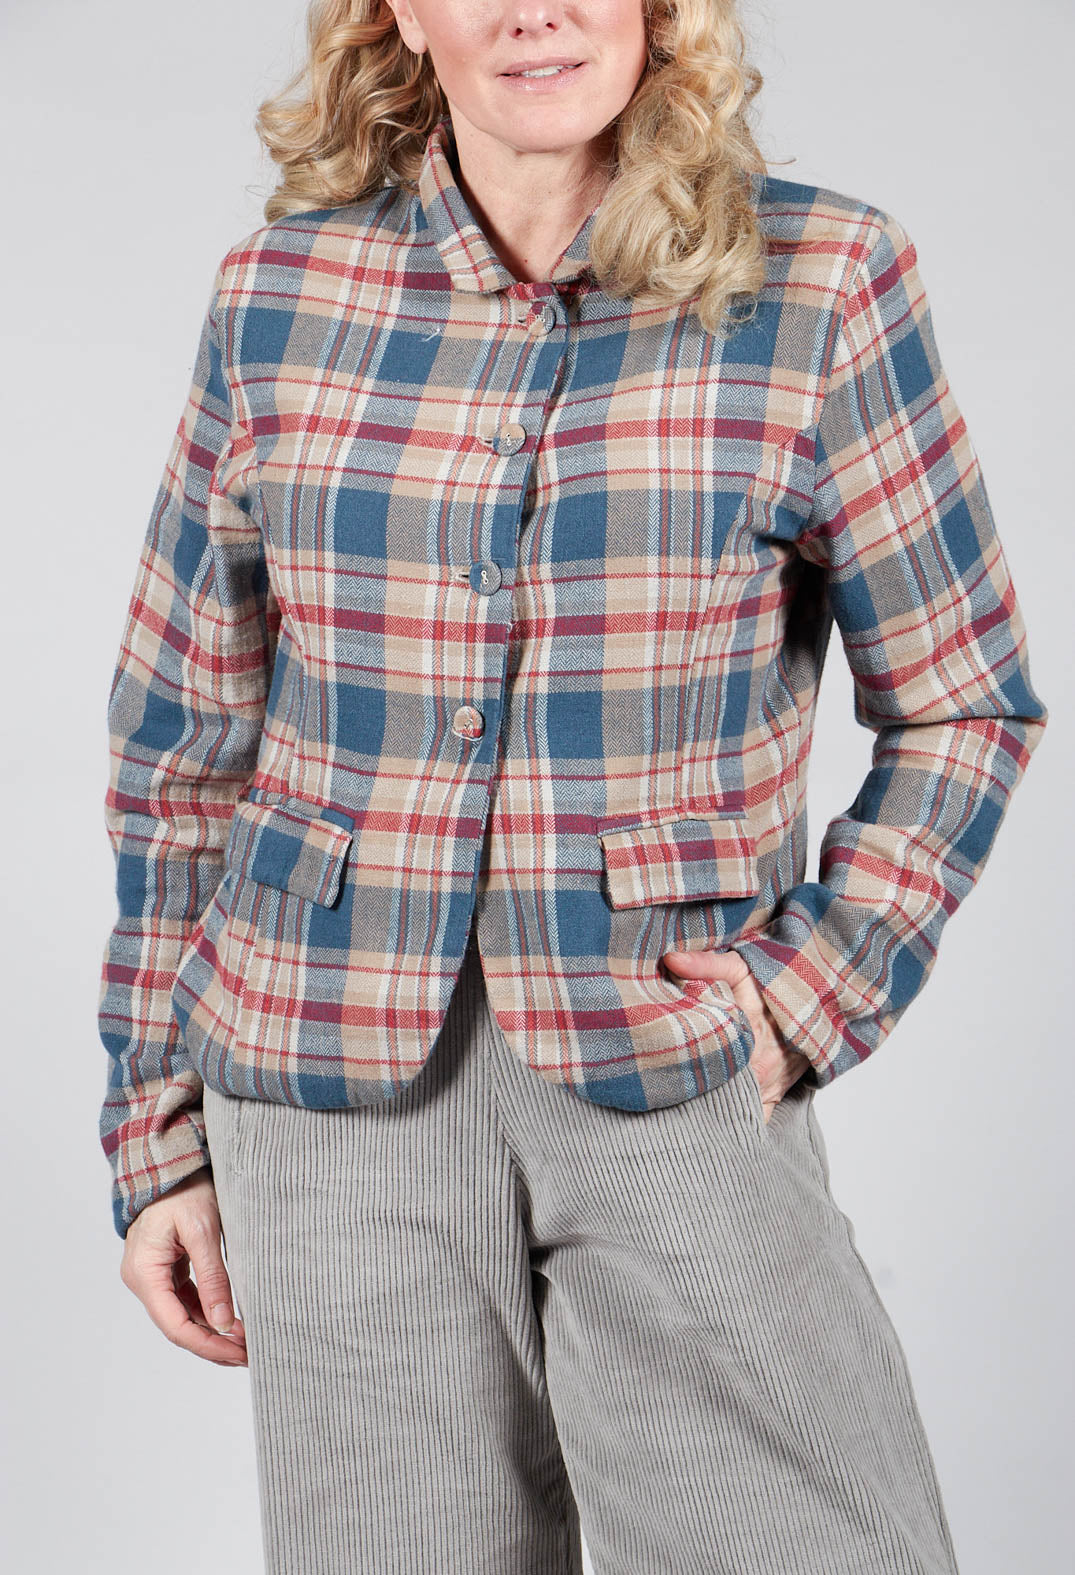 Cotton Plaid Cropped Jacket in Sand